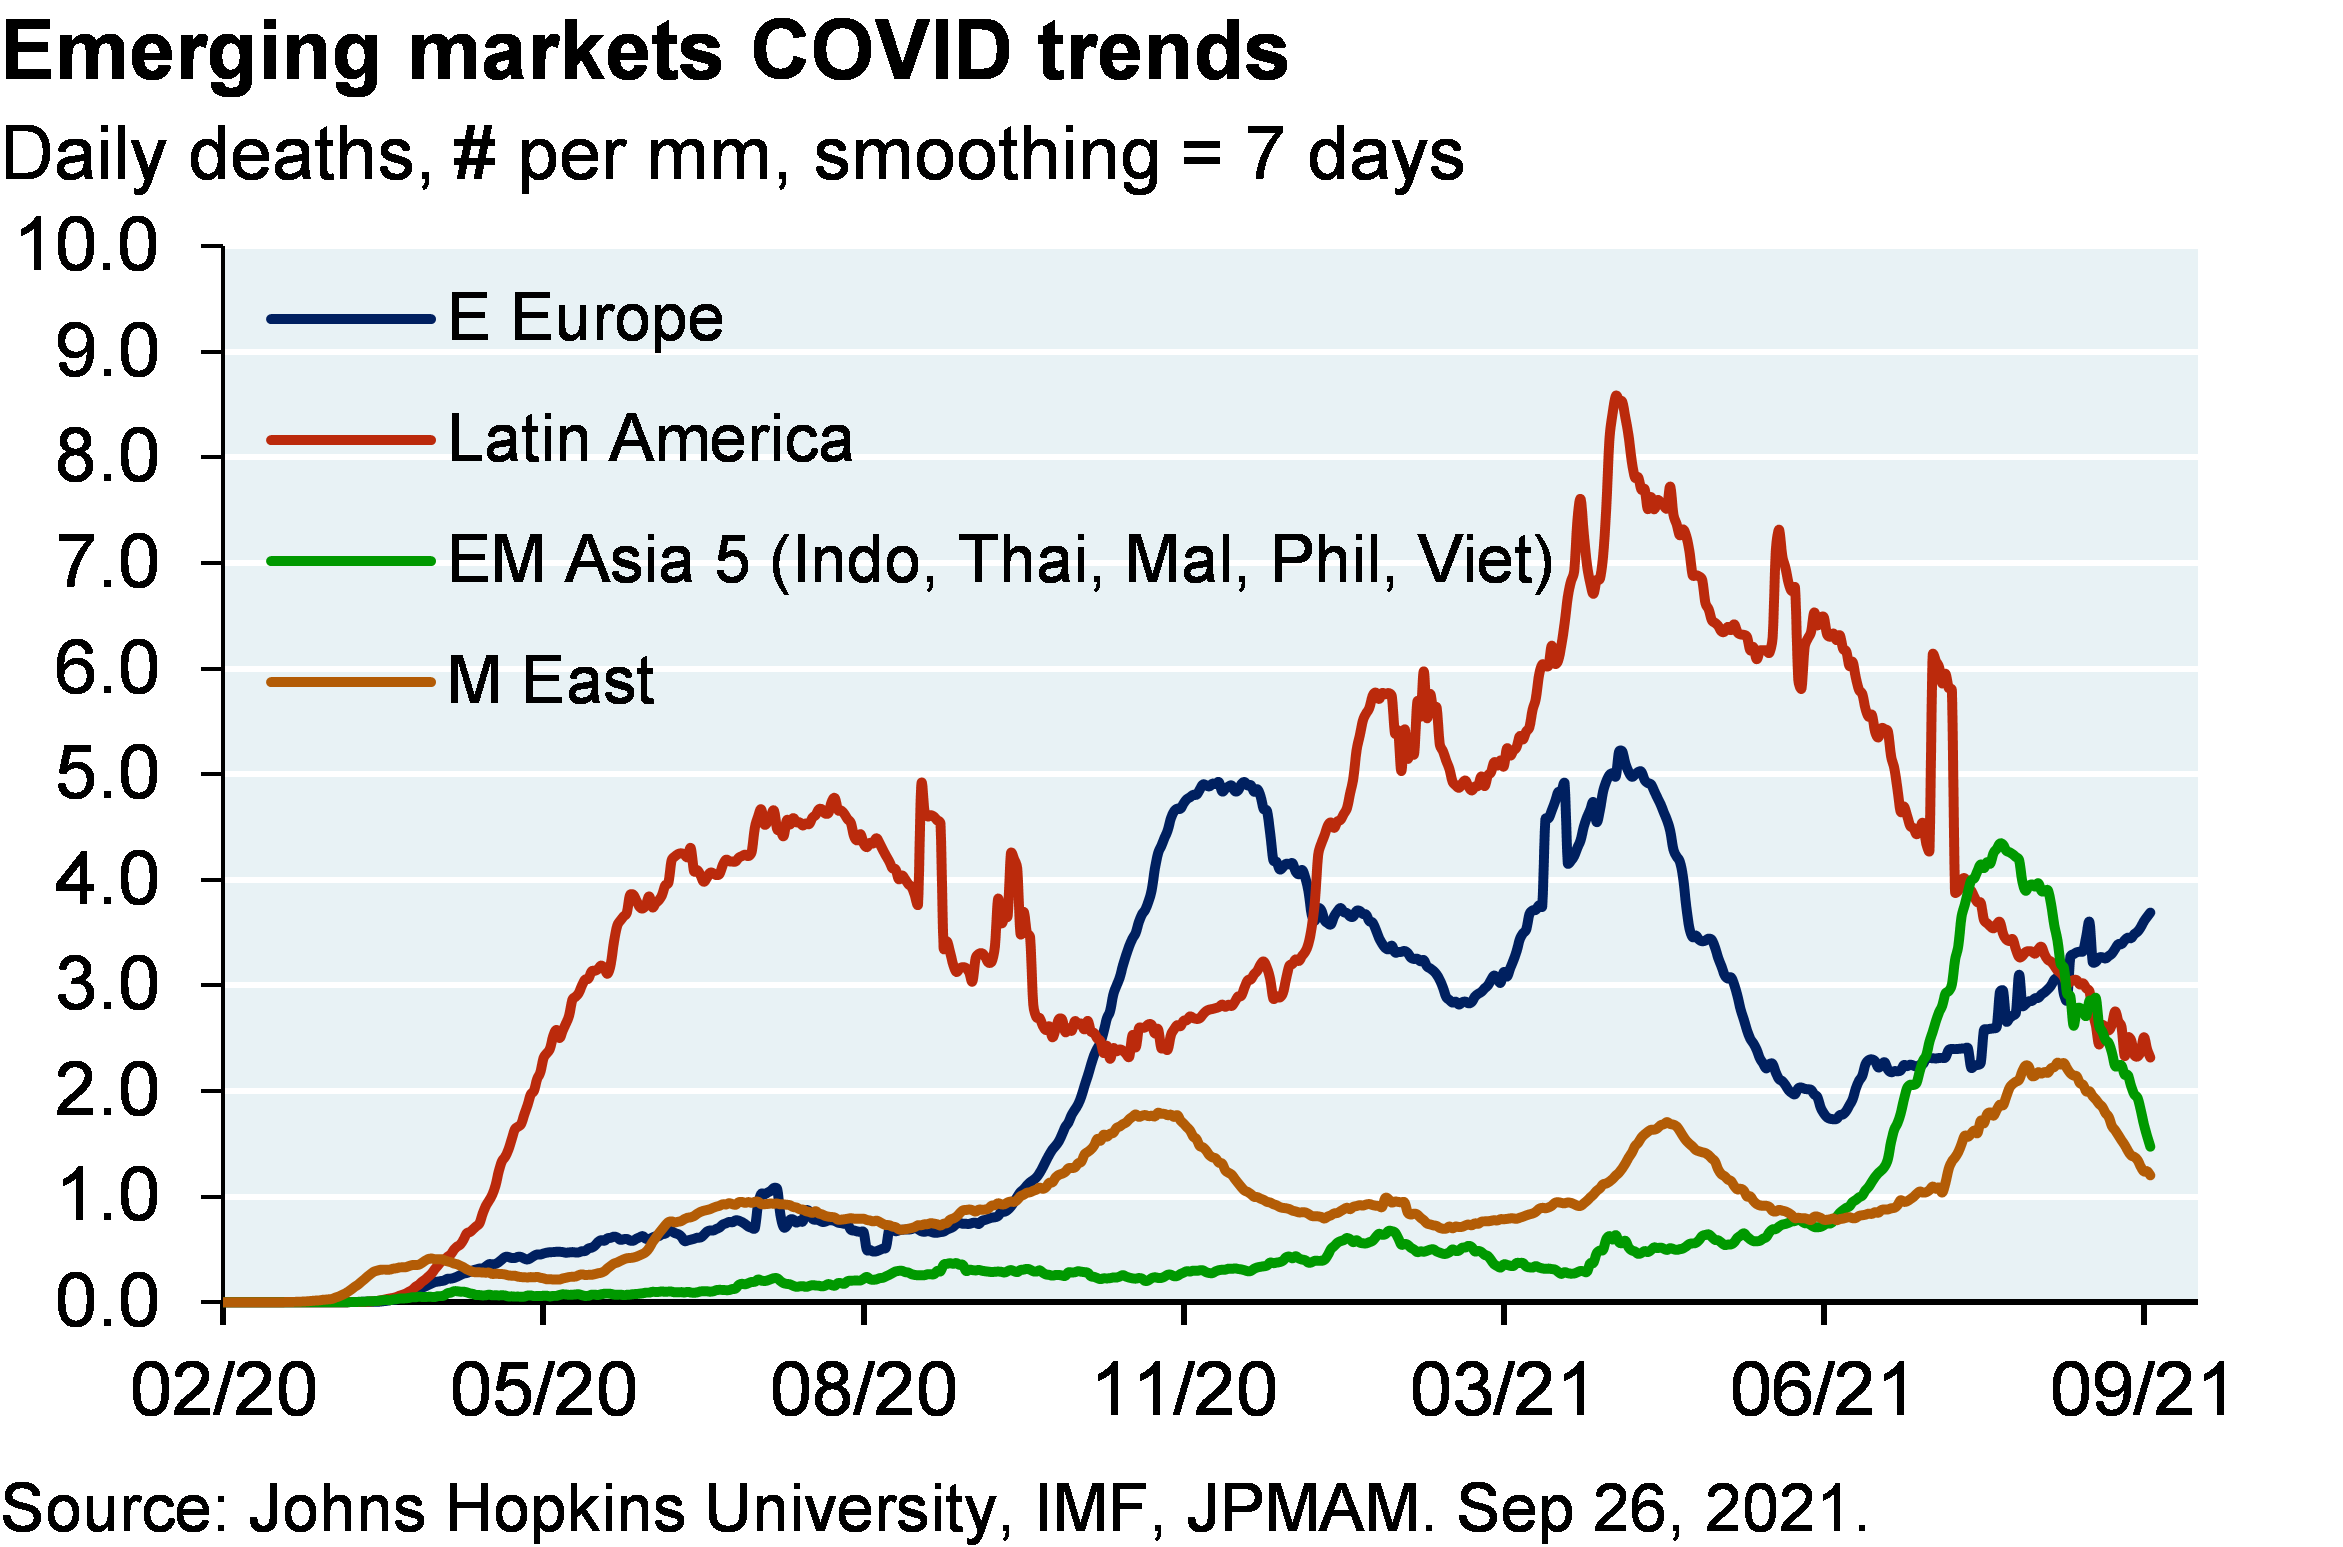 Emerging markets COVID trends